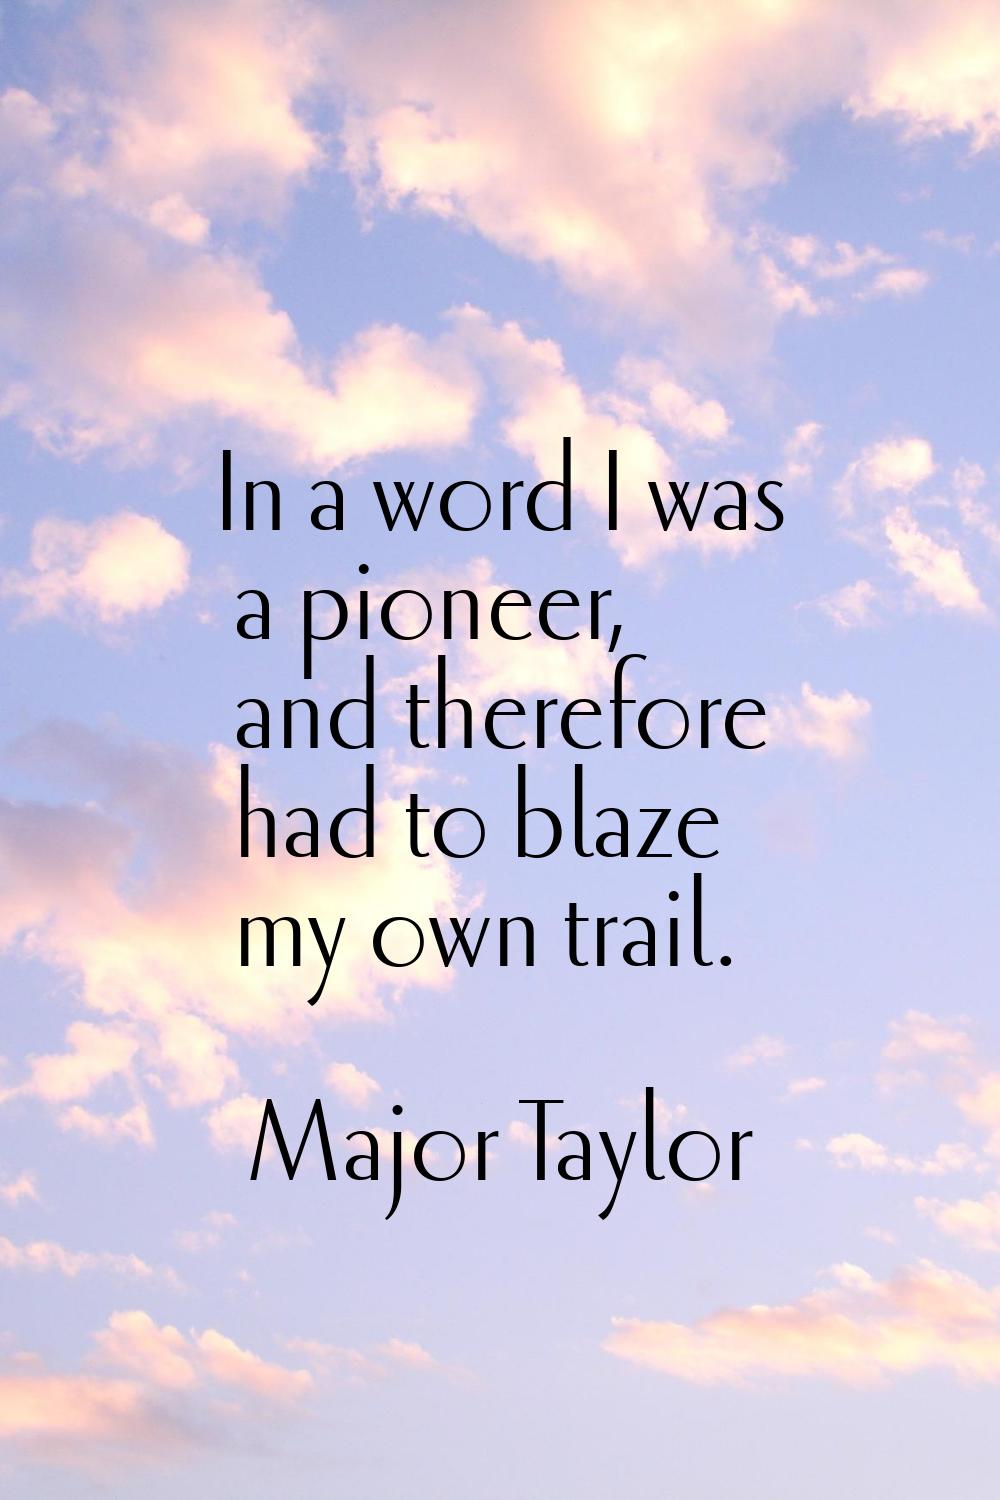 In a word I was a pioneer, and therefore had to blaze my own trail.